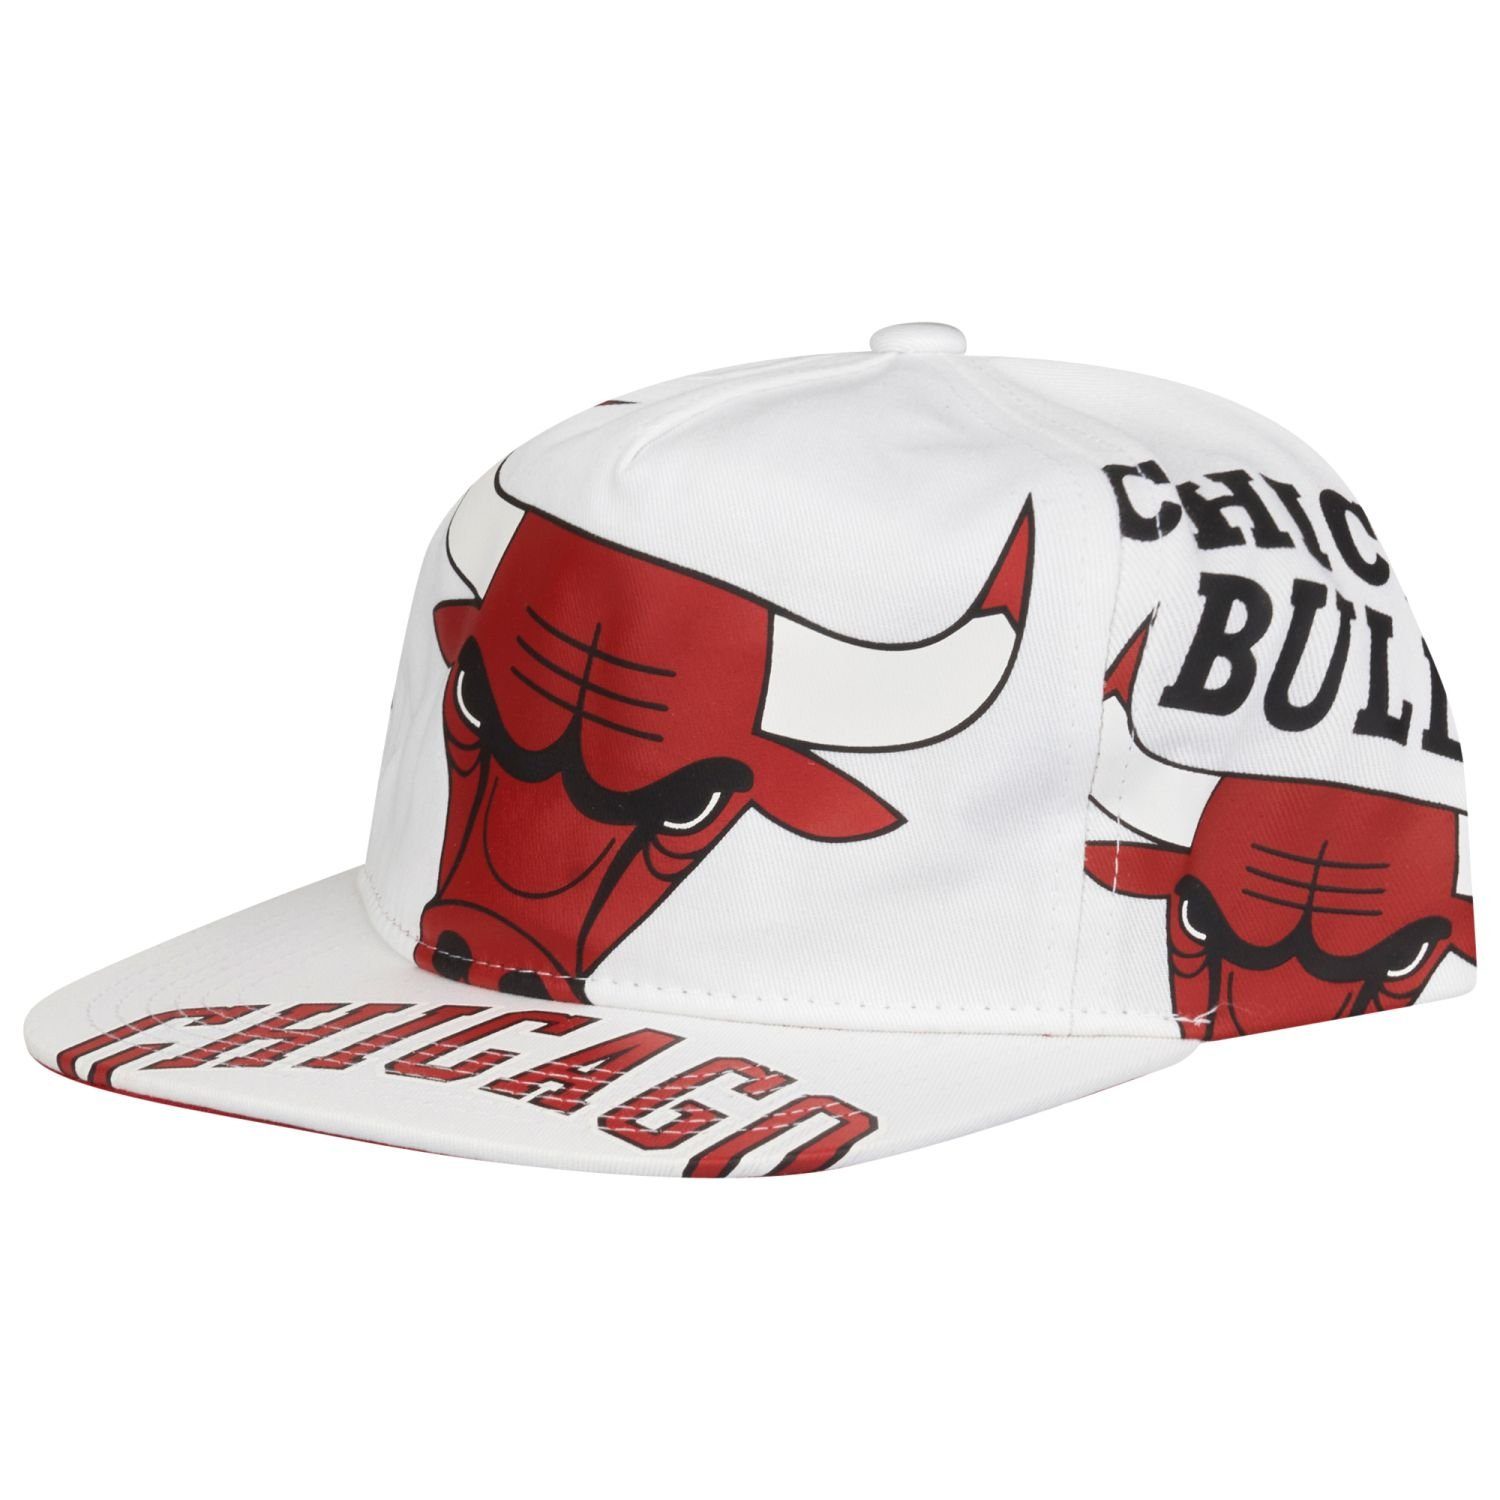 Mitchell & Cap Bulls Snapback Chicago Ness DEADSTOCK Unstructured